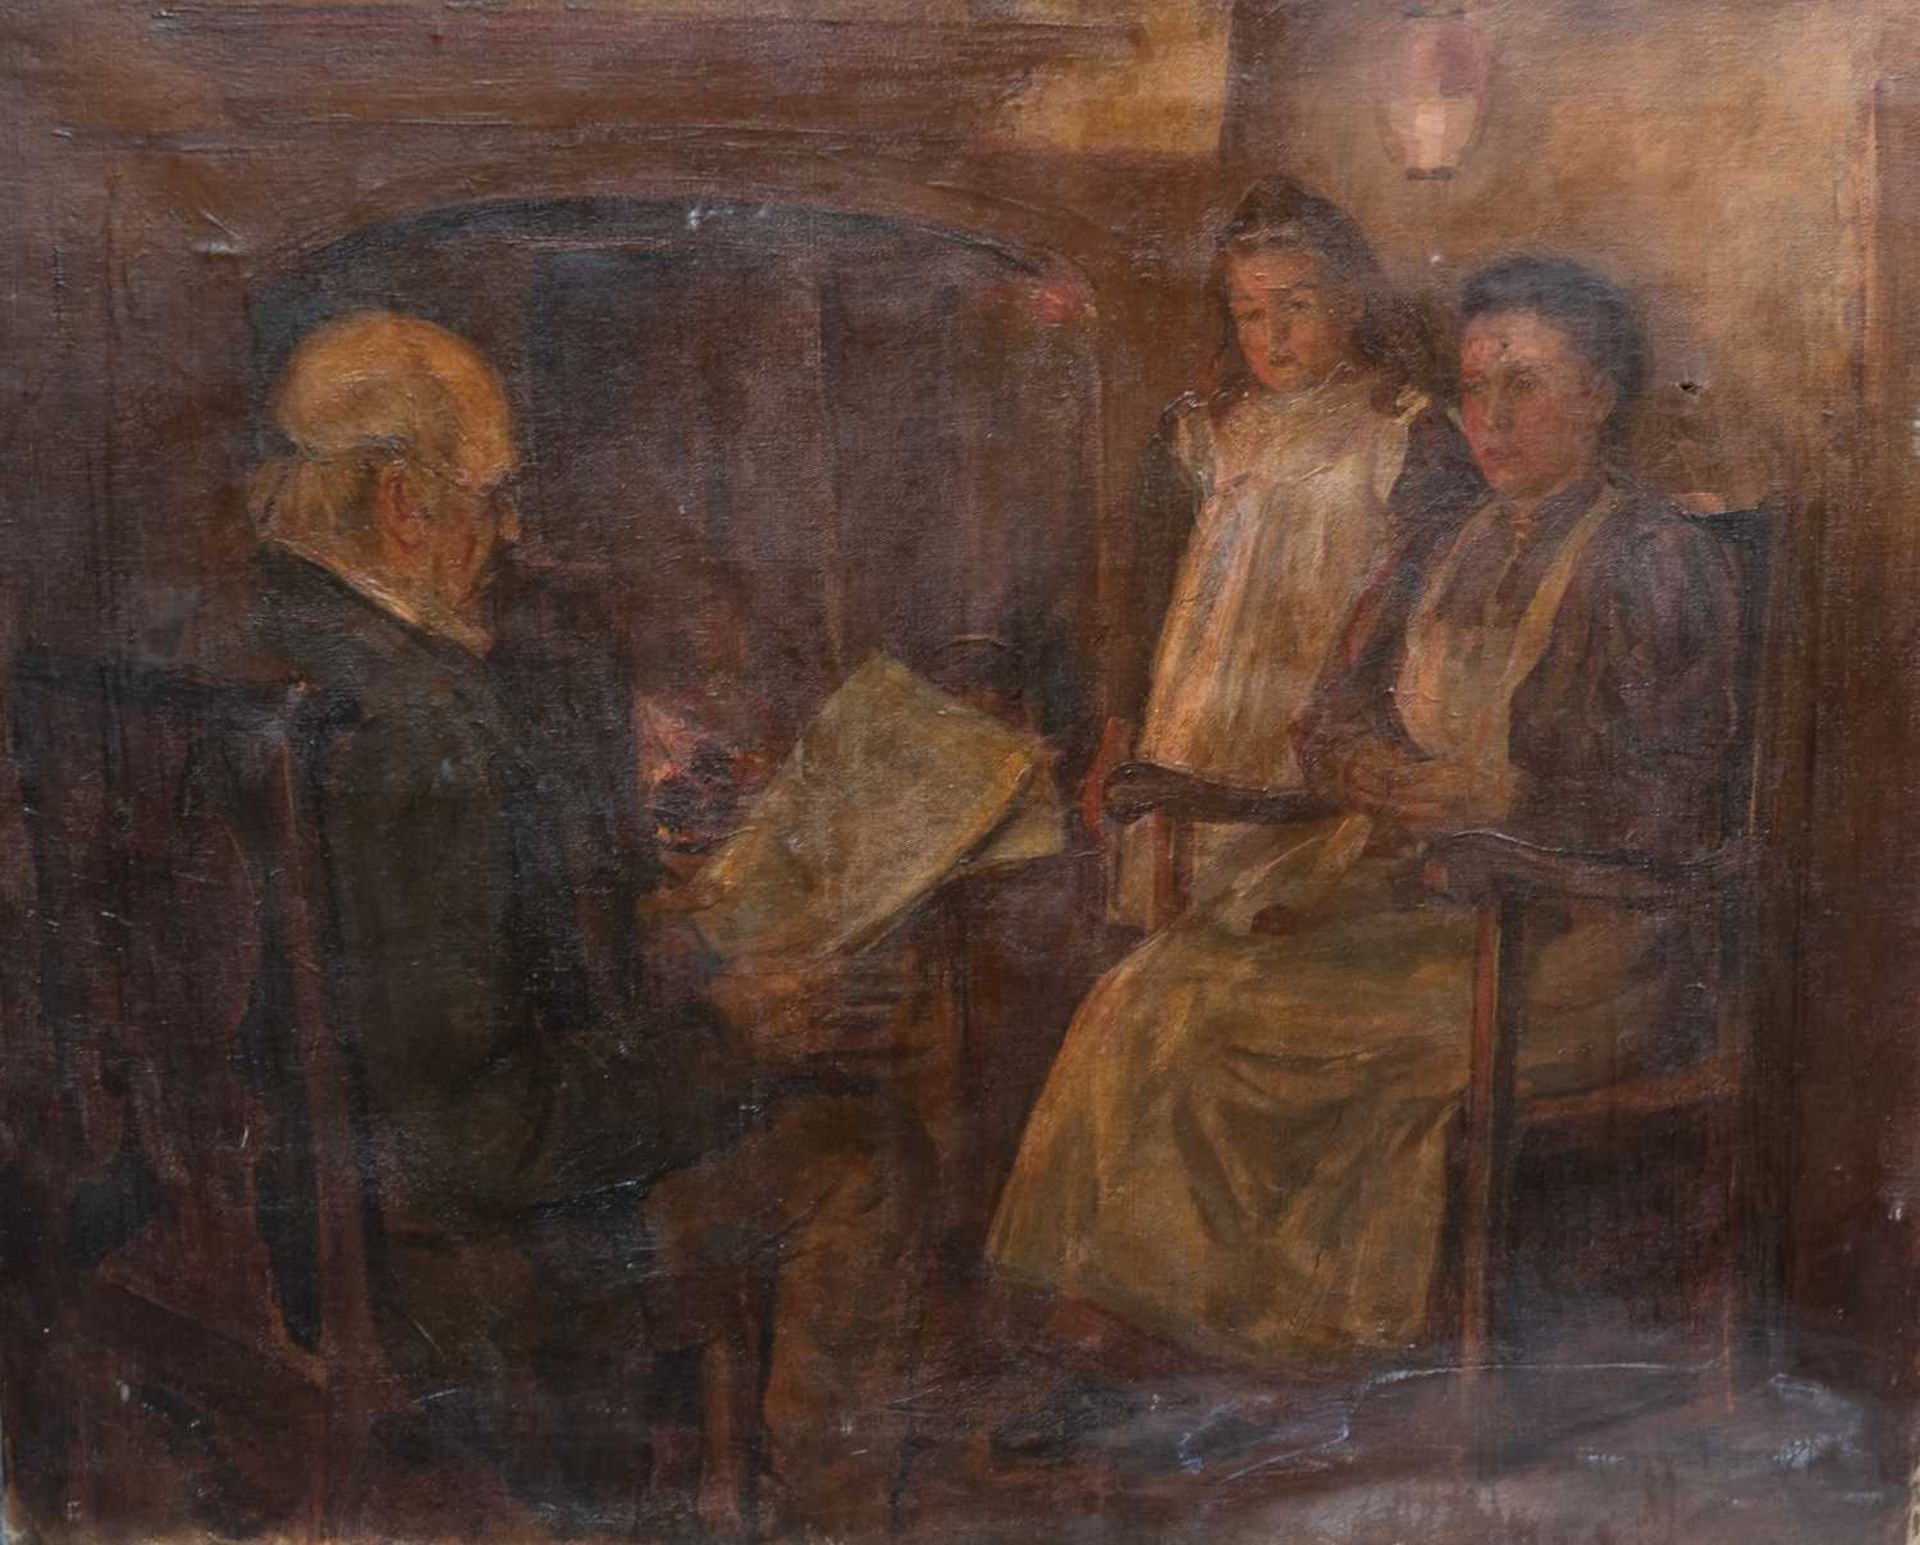 STAITHES SCHOOL (19TH CENTURY) FAMILY IN AN INTERIOR